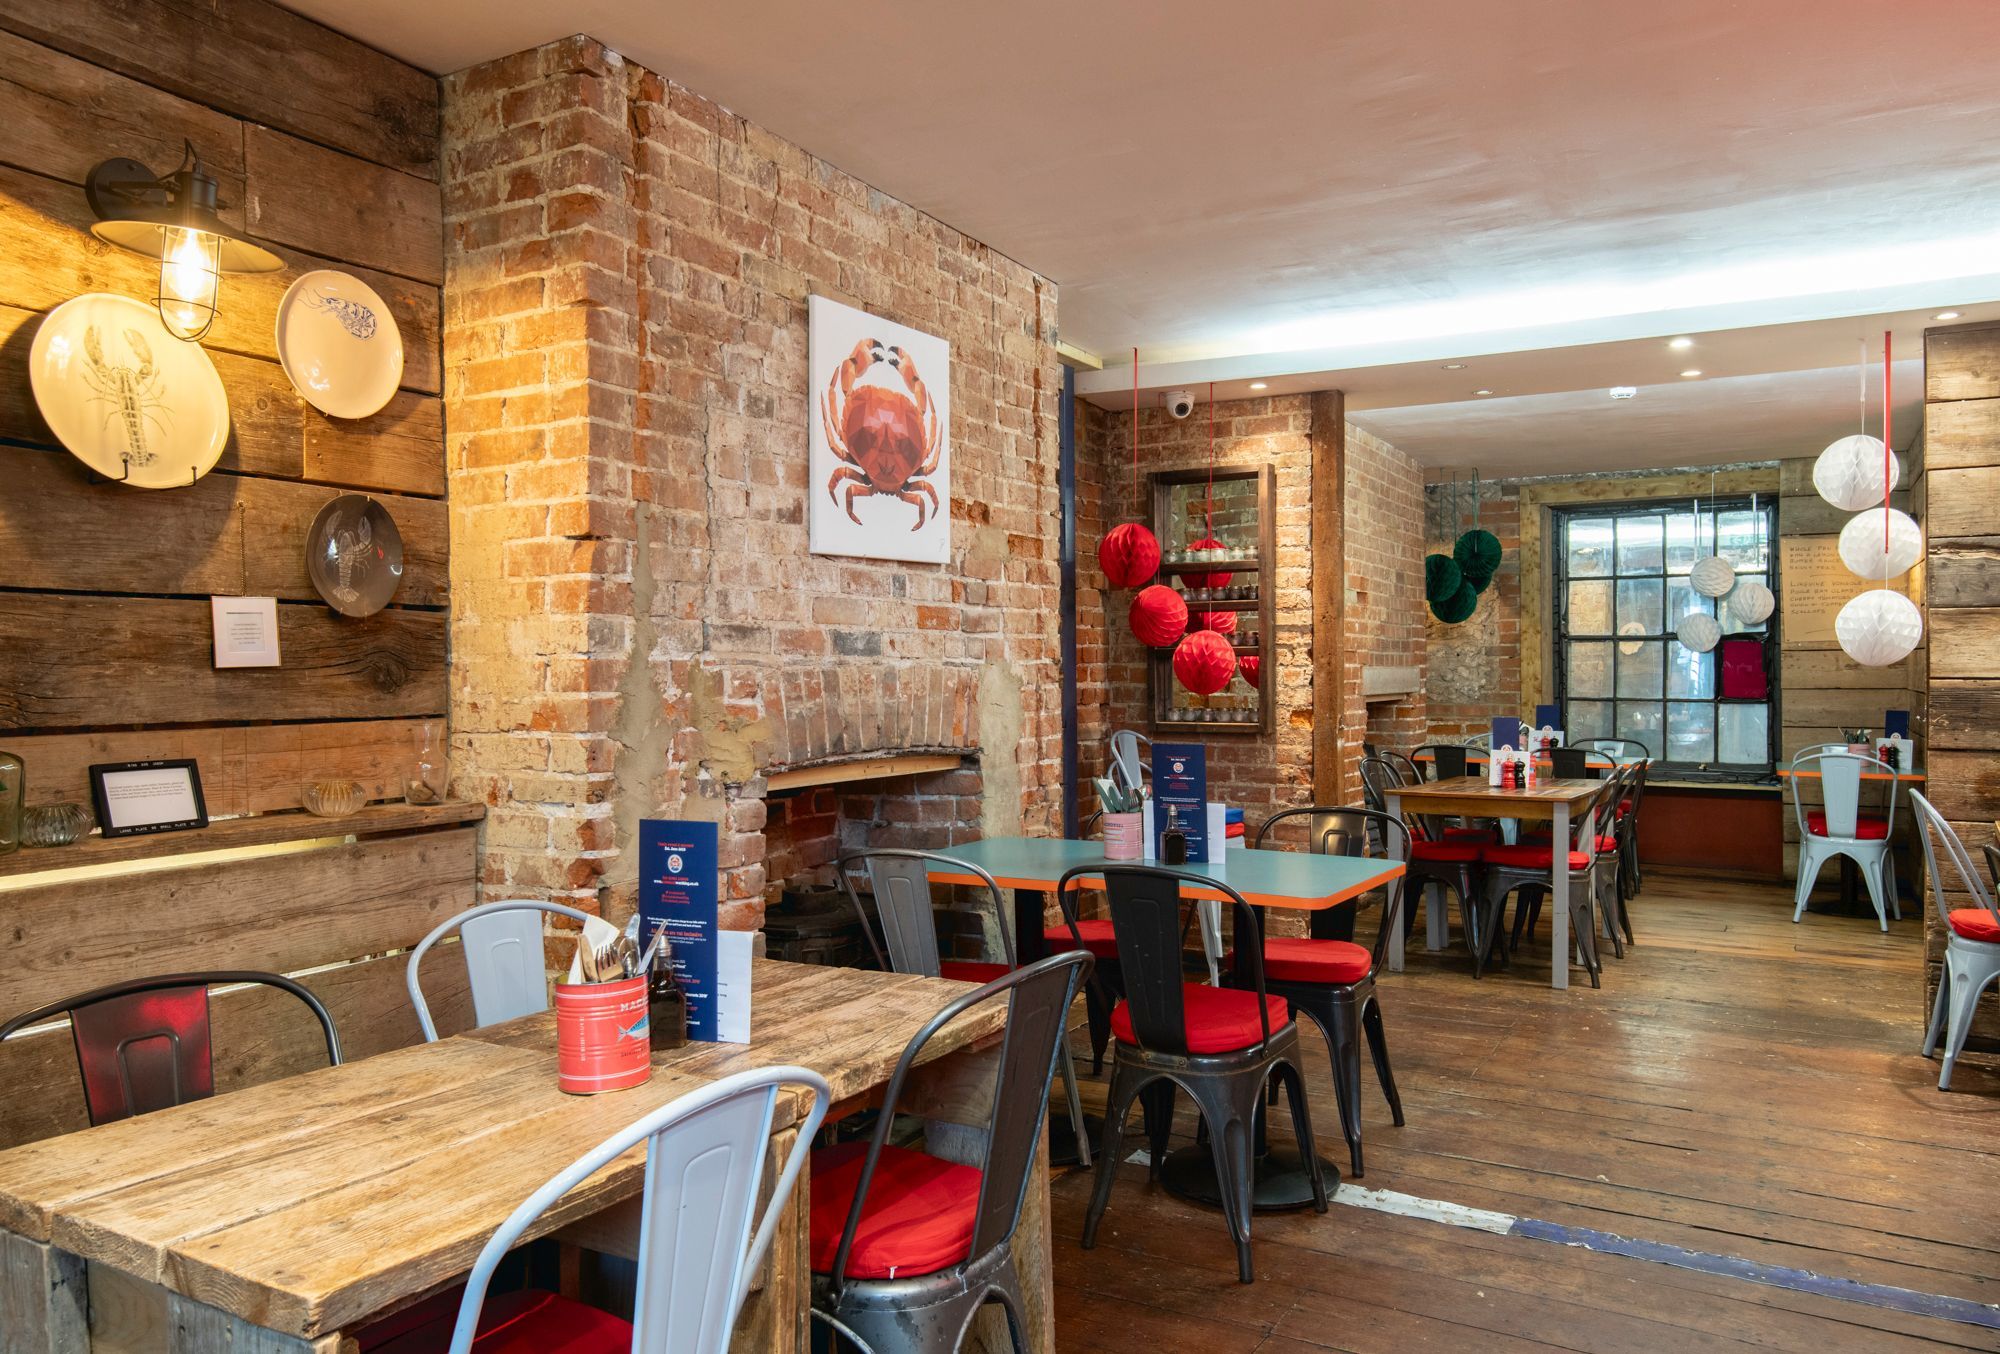 interior shot of the Crabshack. Wooden and brick walls, wooden tables and chairs with red covers.